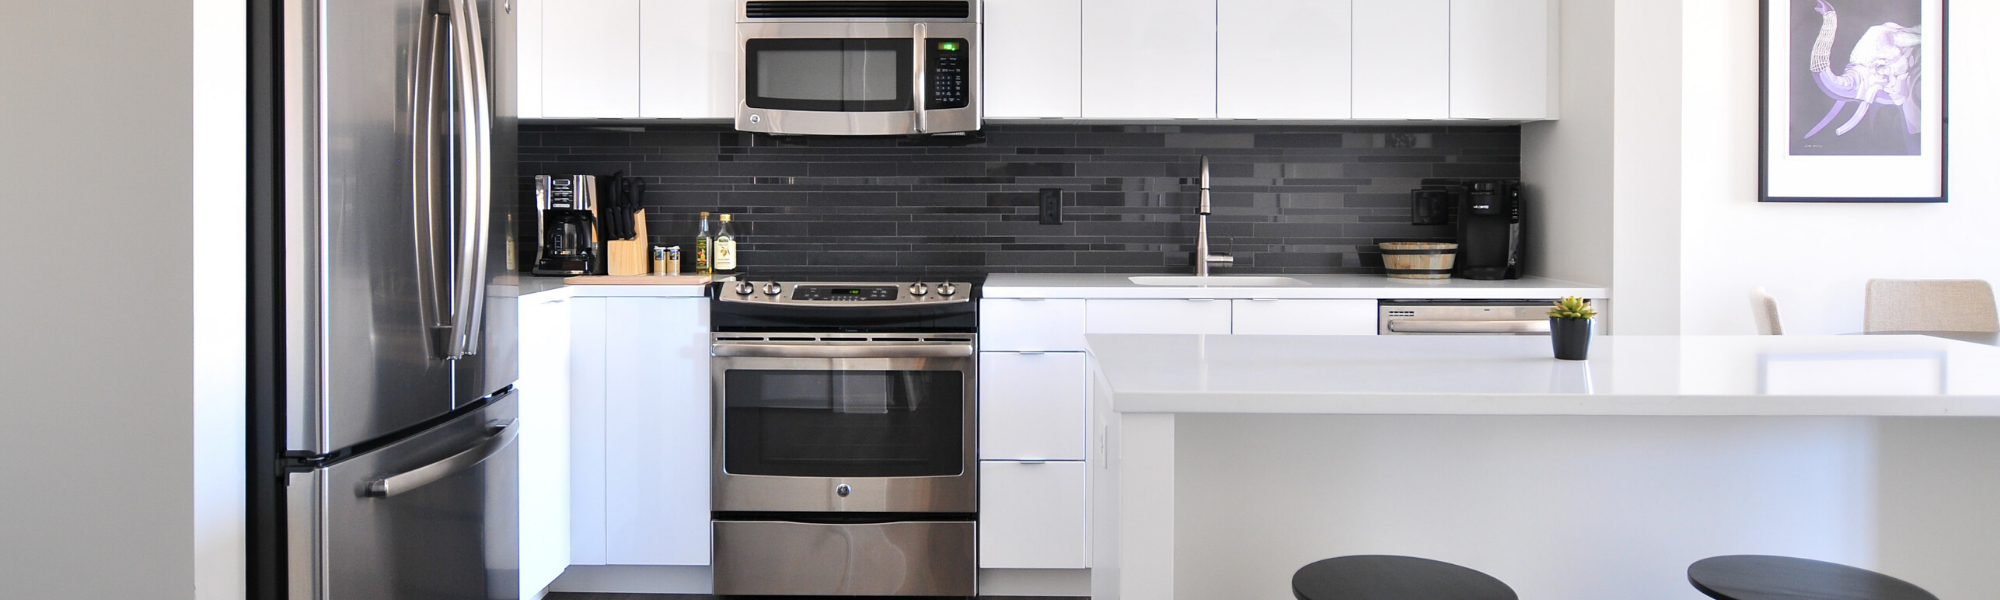 Information for sellers header image showing a white and stainless steel bright kitchen.